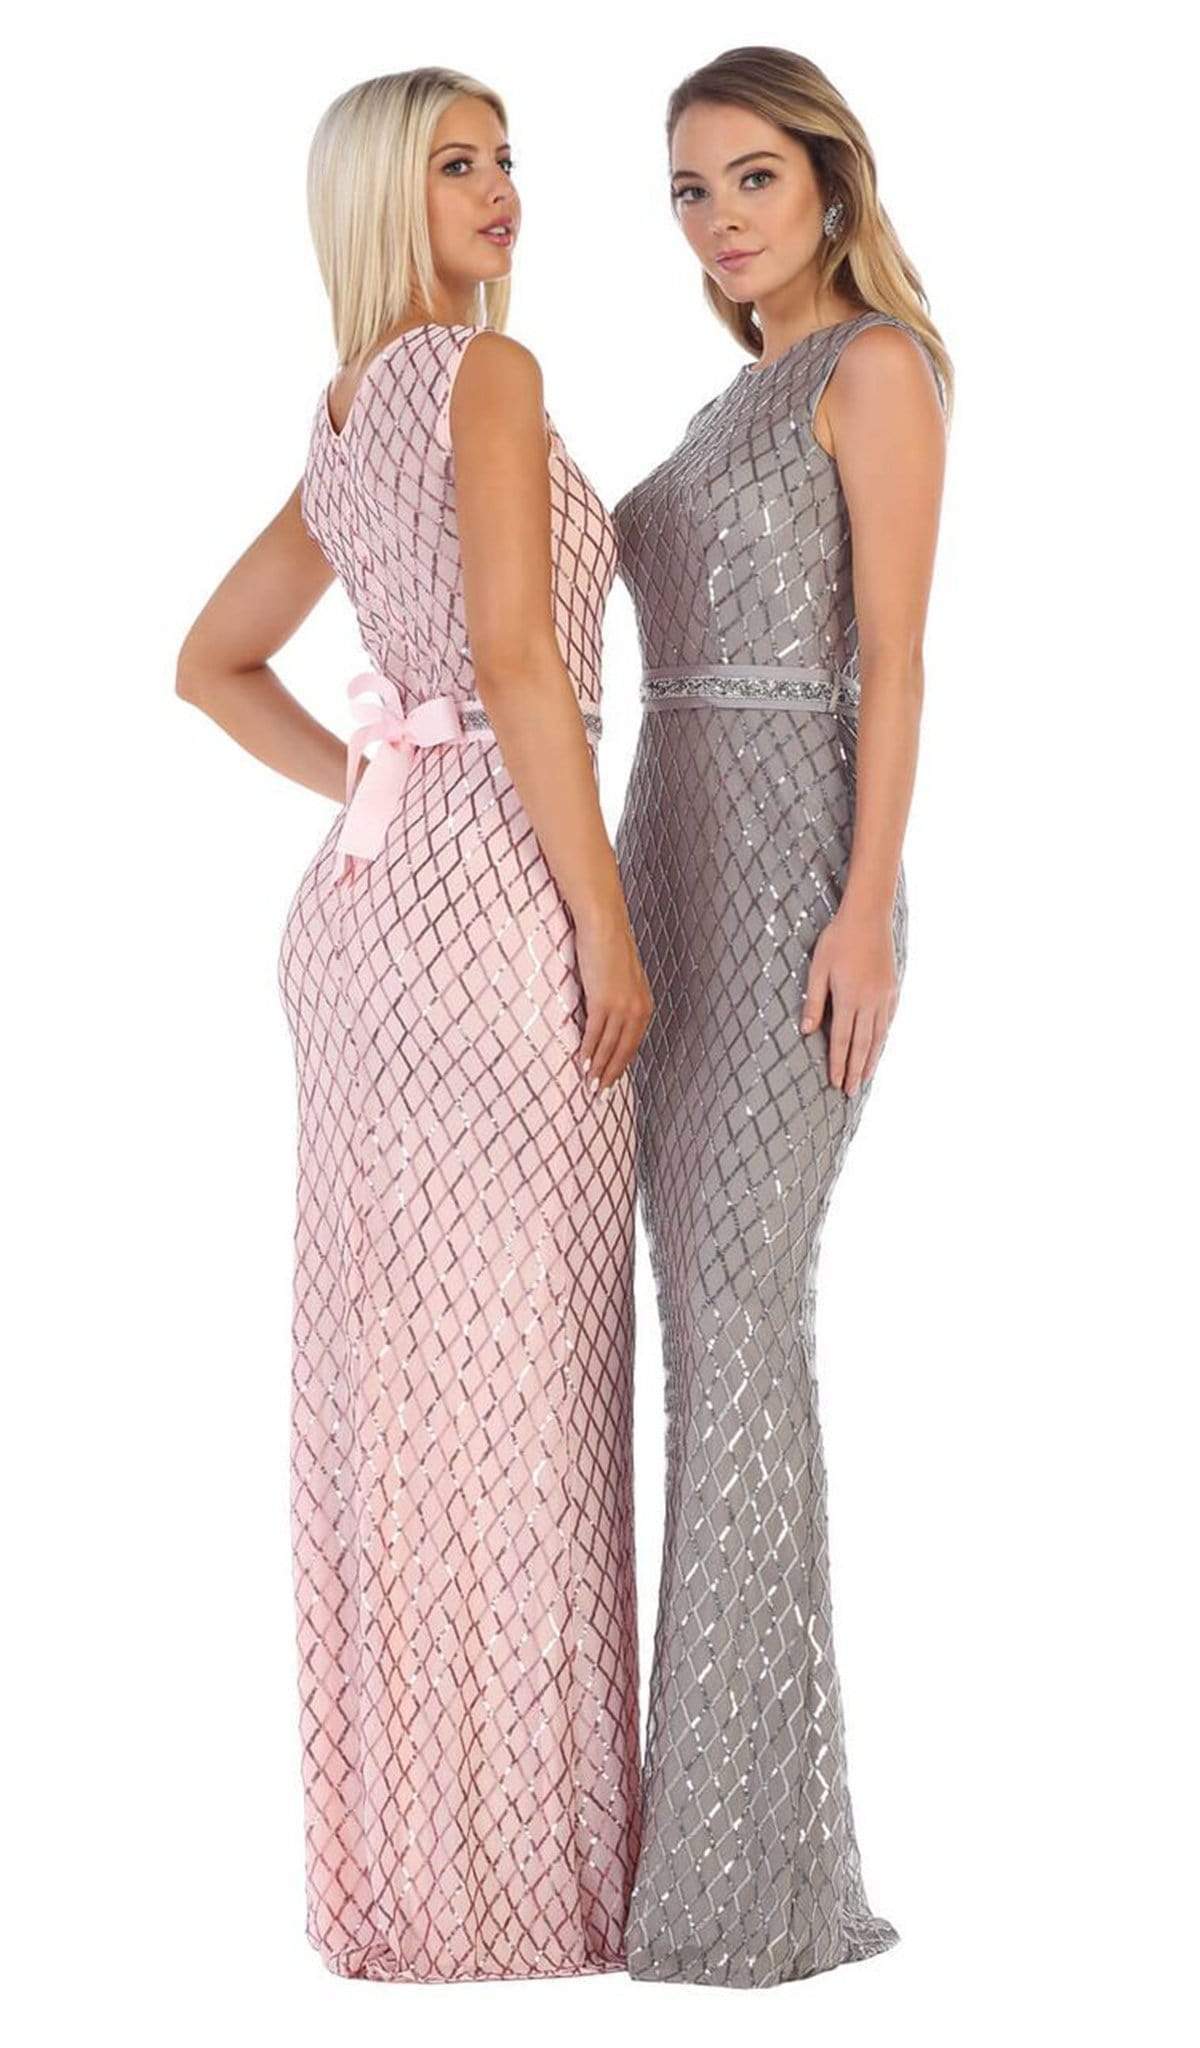 May Queen - MQ1606 Sequined Lattice Sheer Sheath Gown Bridesmaid Dresses